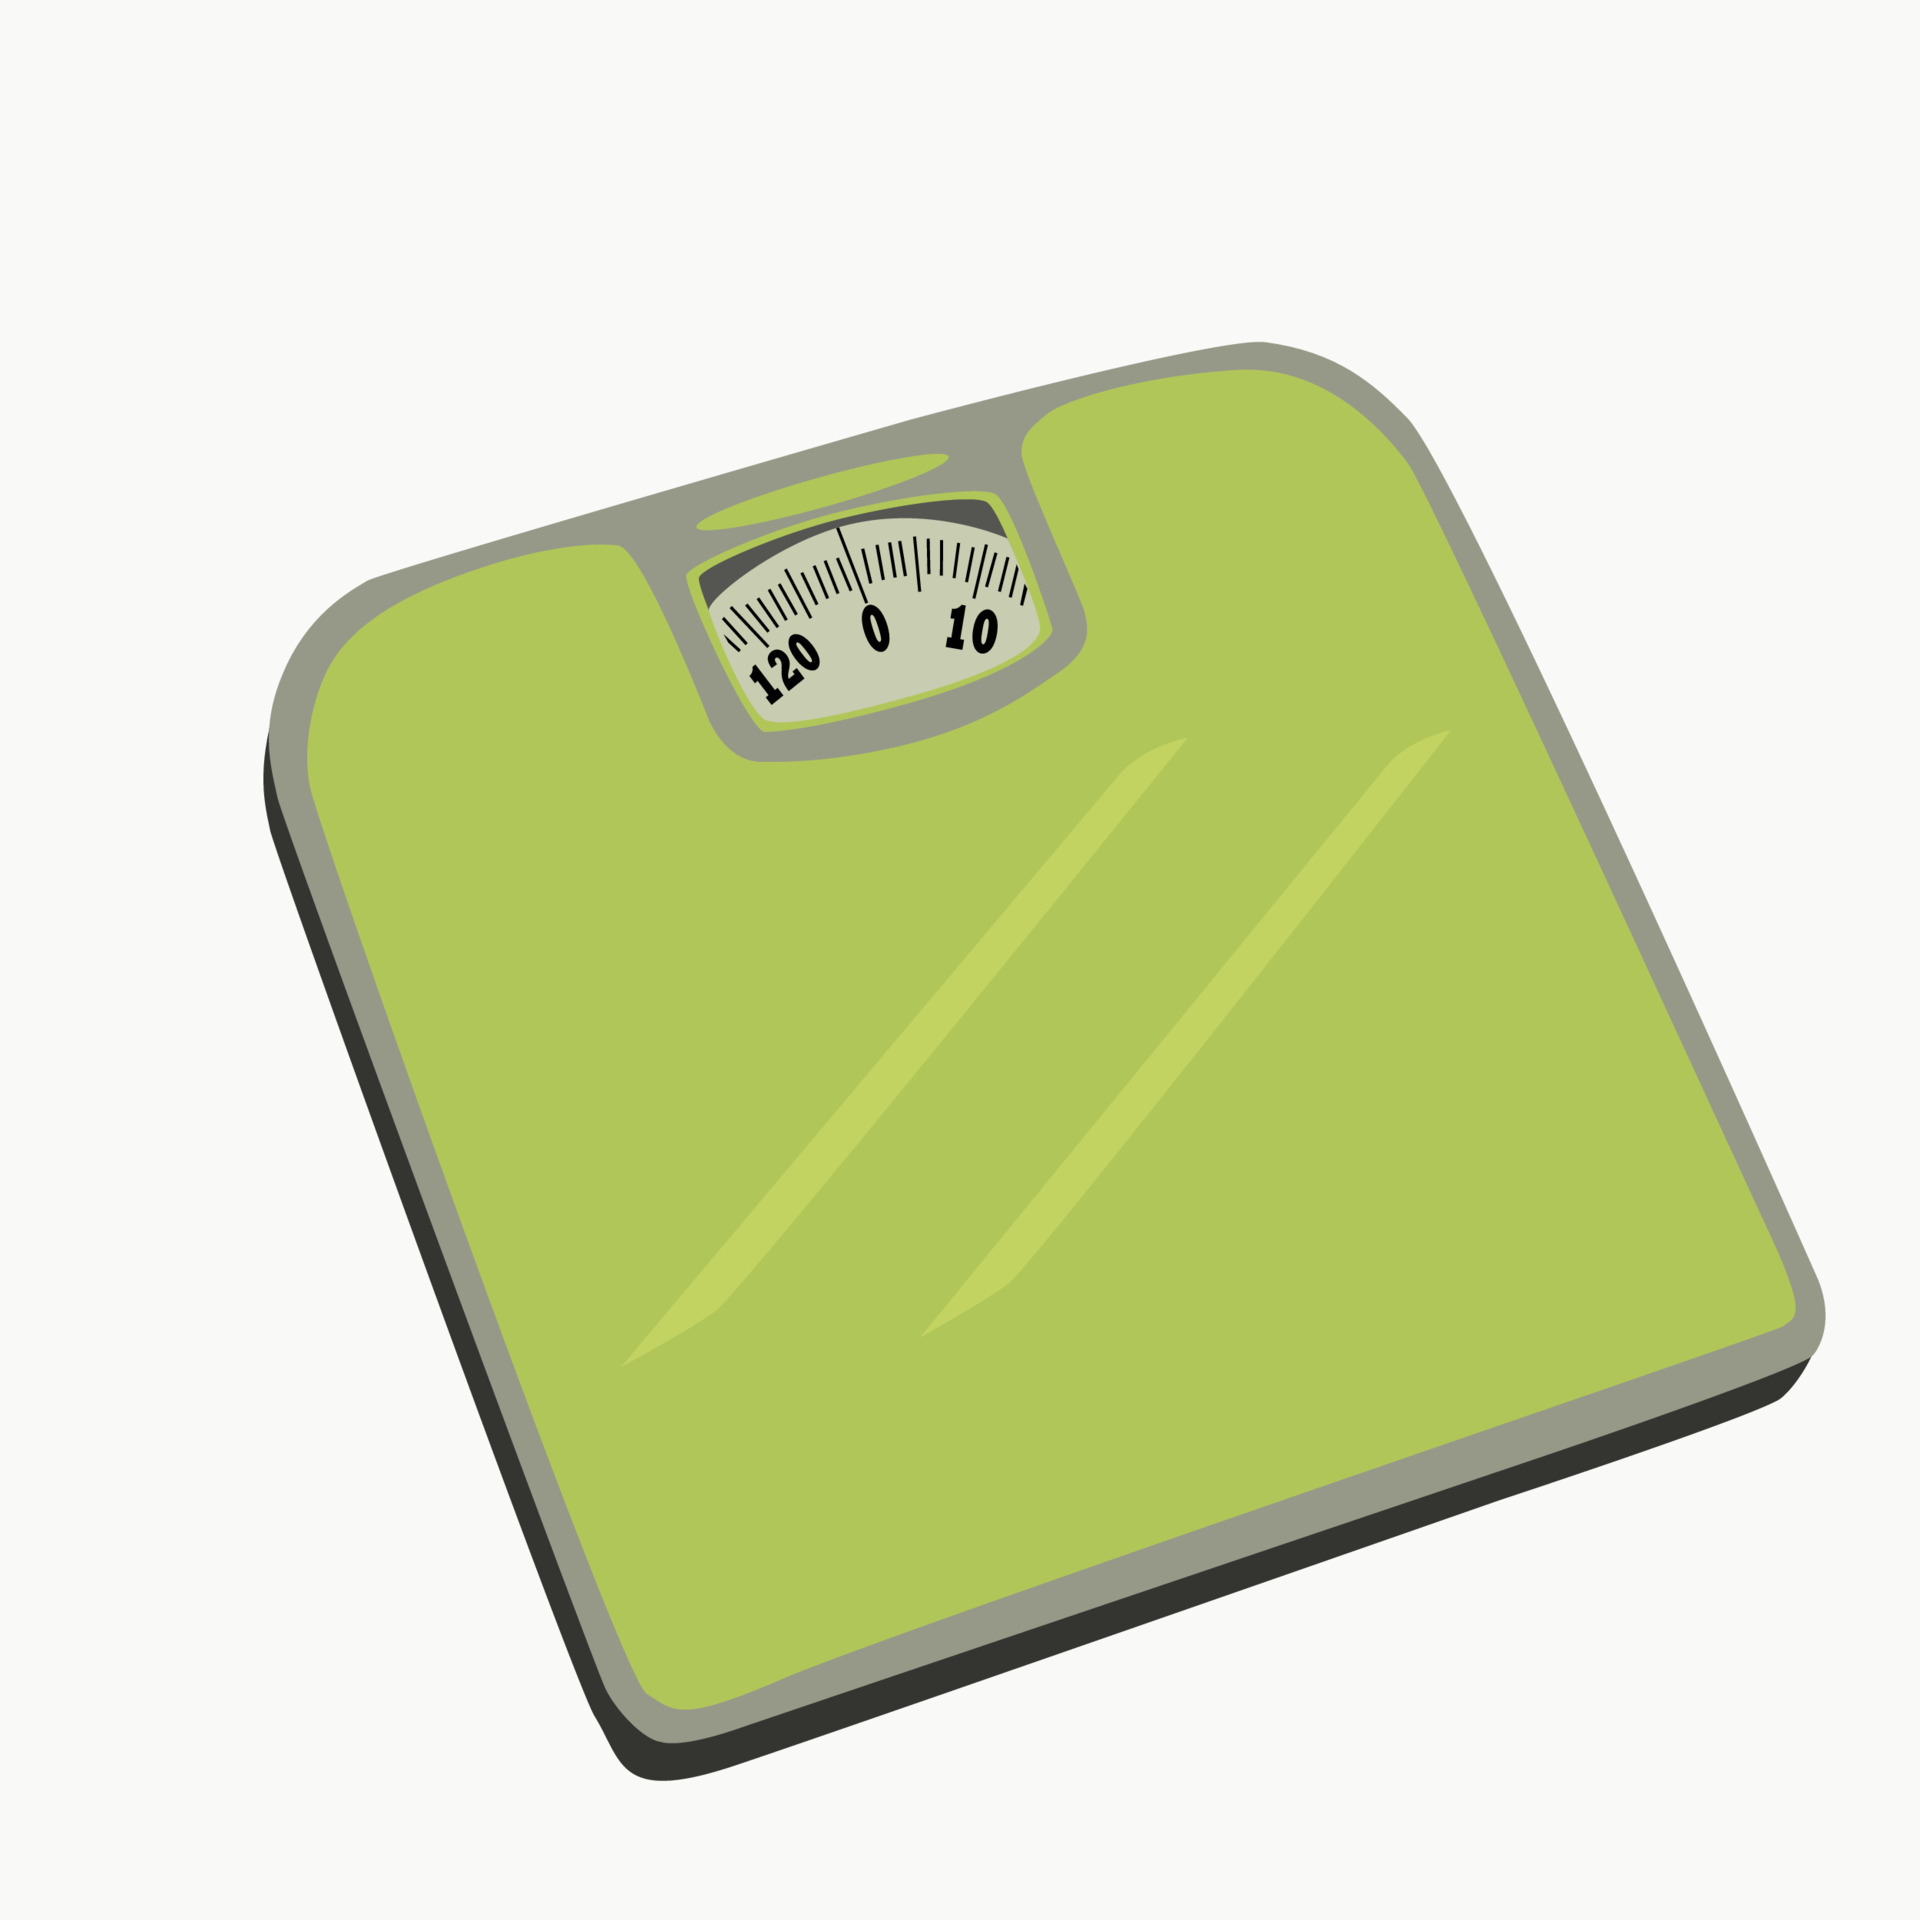 https://static.vecteezy.com/system/resources/previews/007/654/098/original/green-bathroom-scales-in-cartoon-style-free-vector.jpg